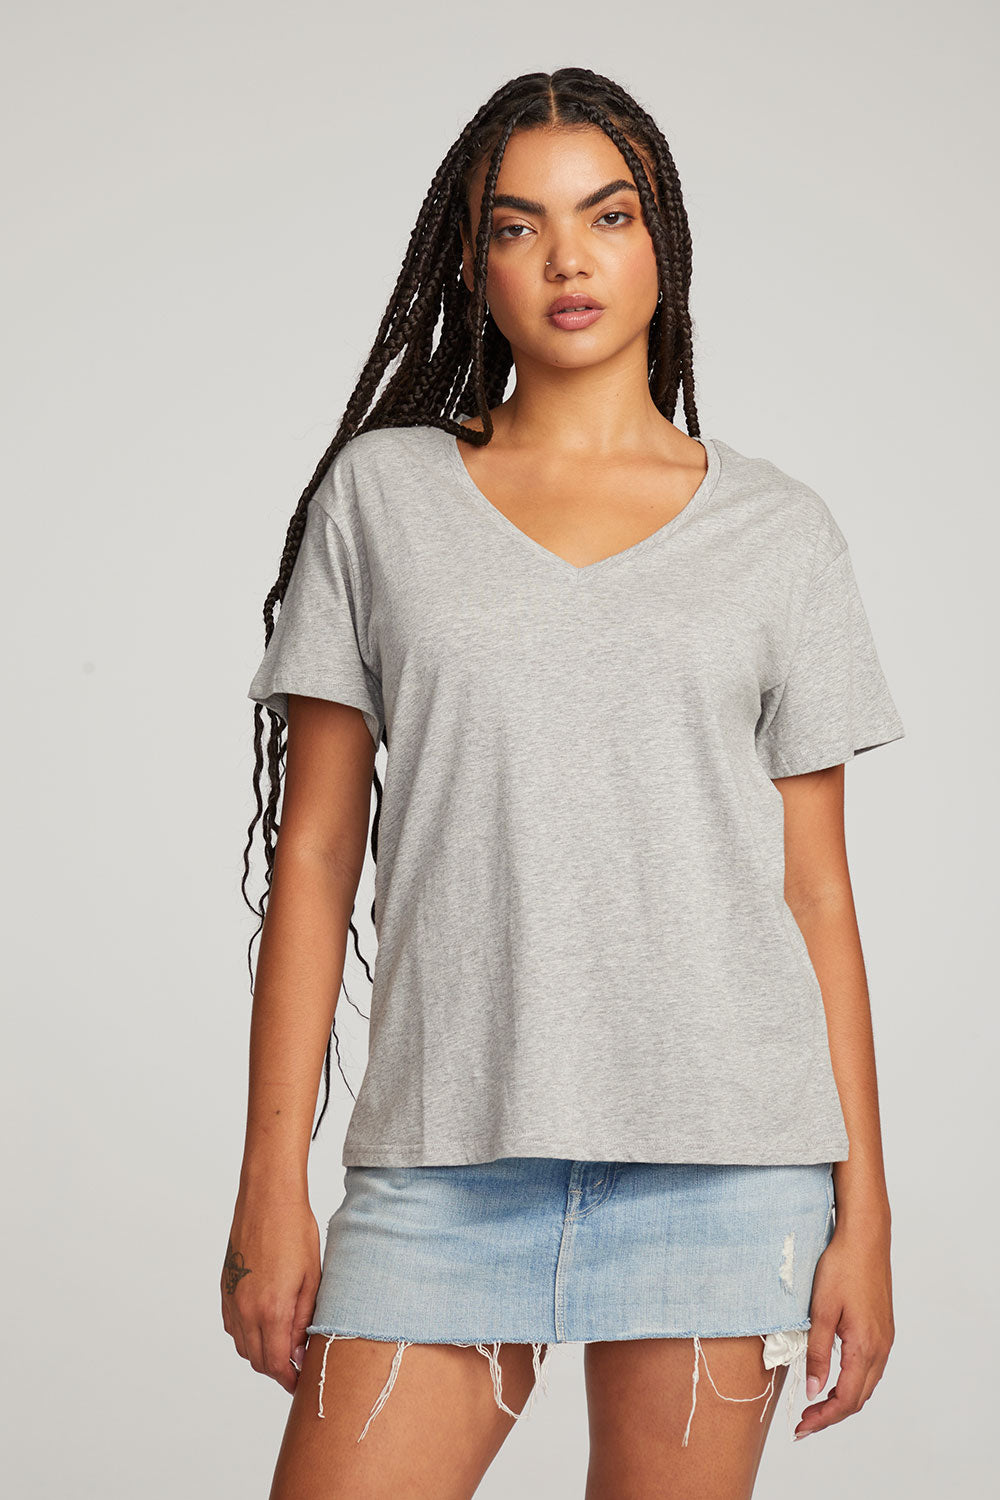 Everyday Essential V-neck Tee WOMENS chaserbrand